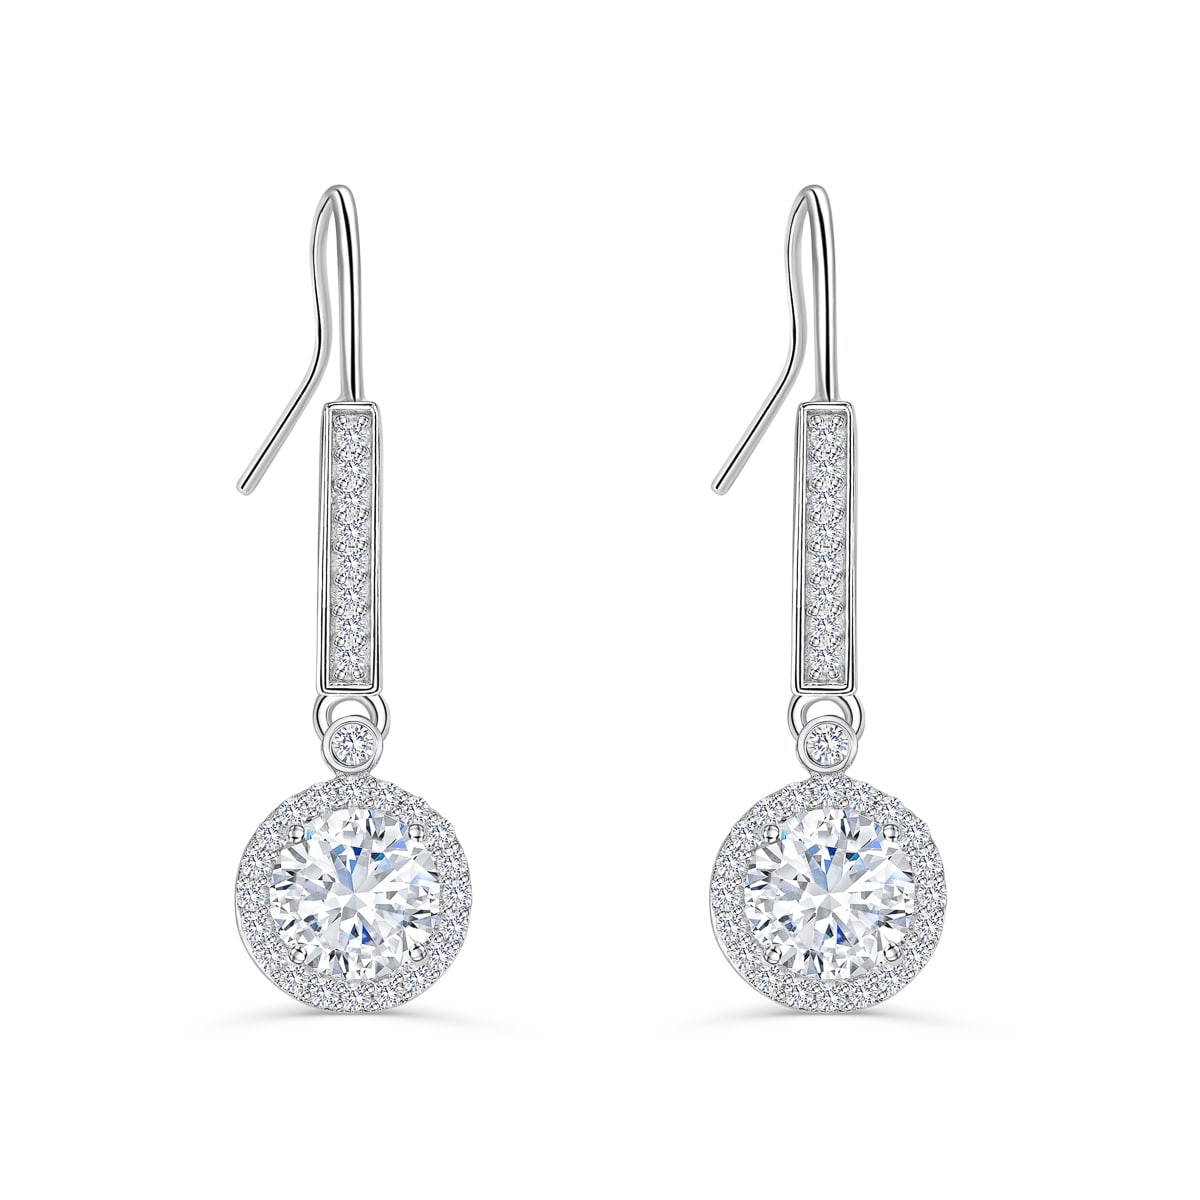 the blossom silver earrings